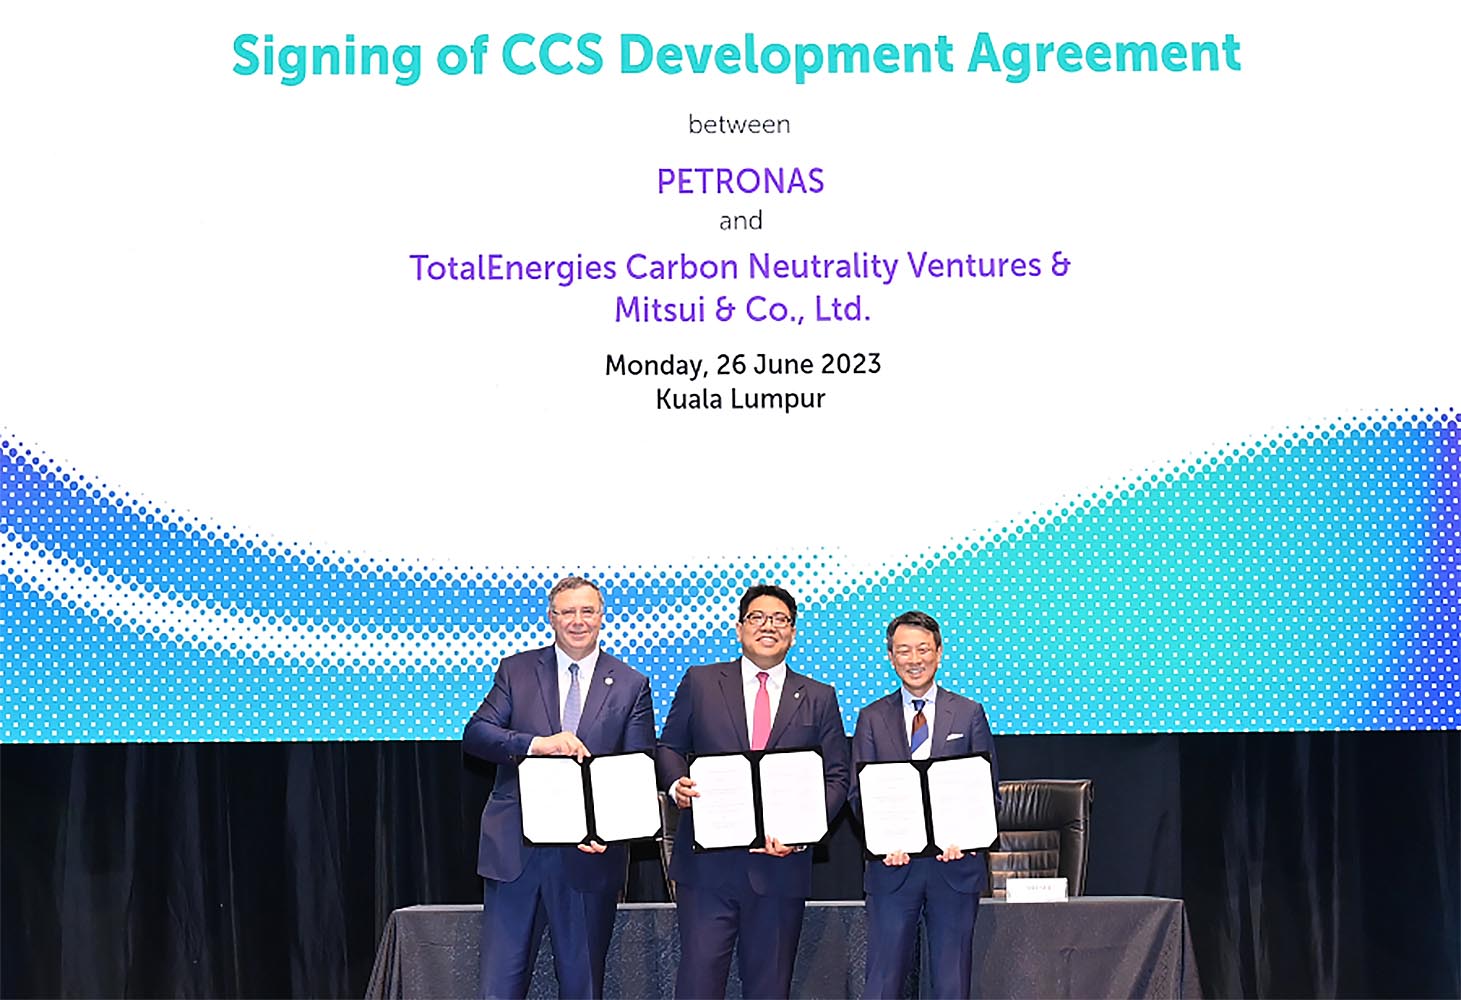 TotalEnergies to develop carbon storage project with Petronas and Mitsui